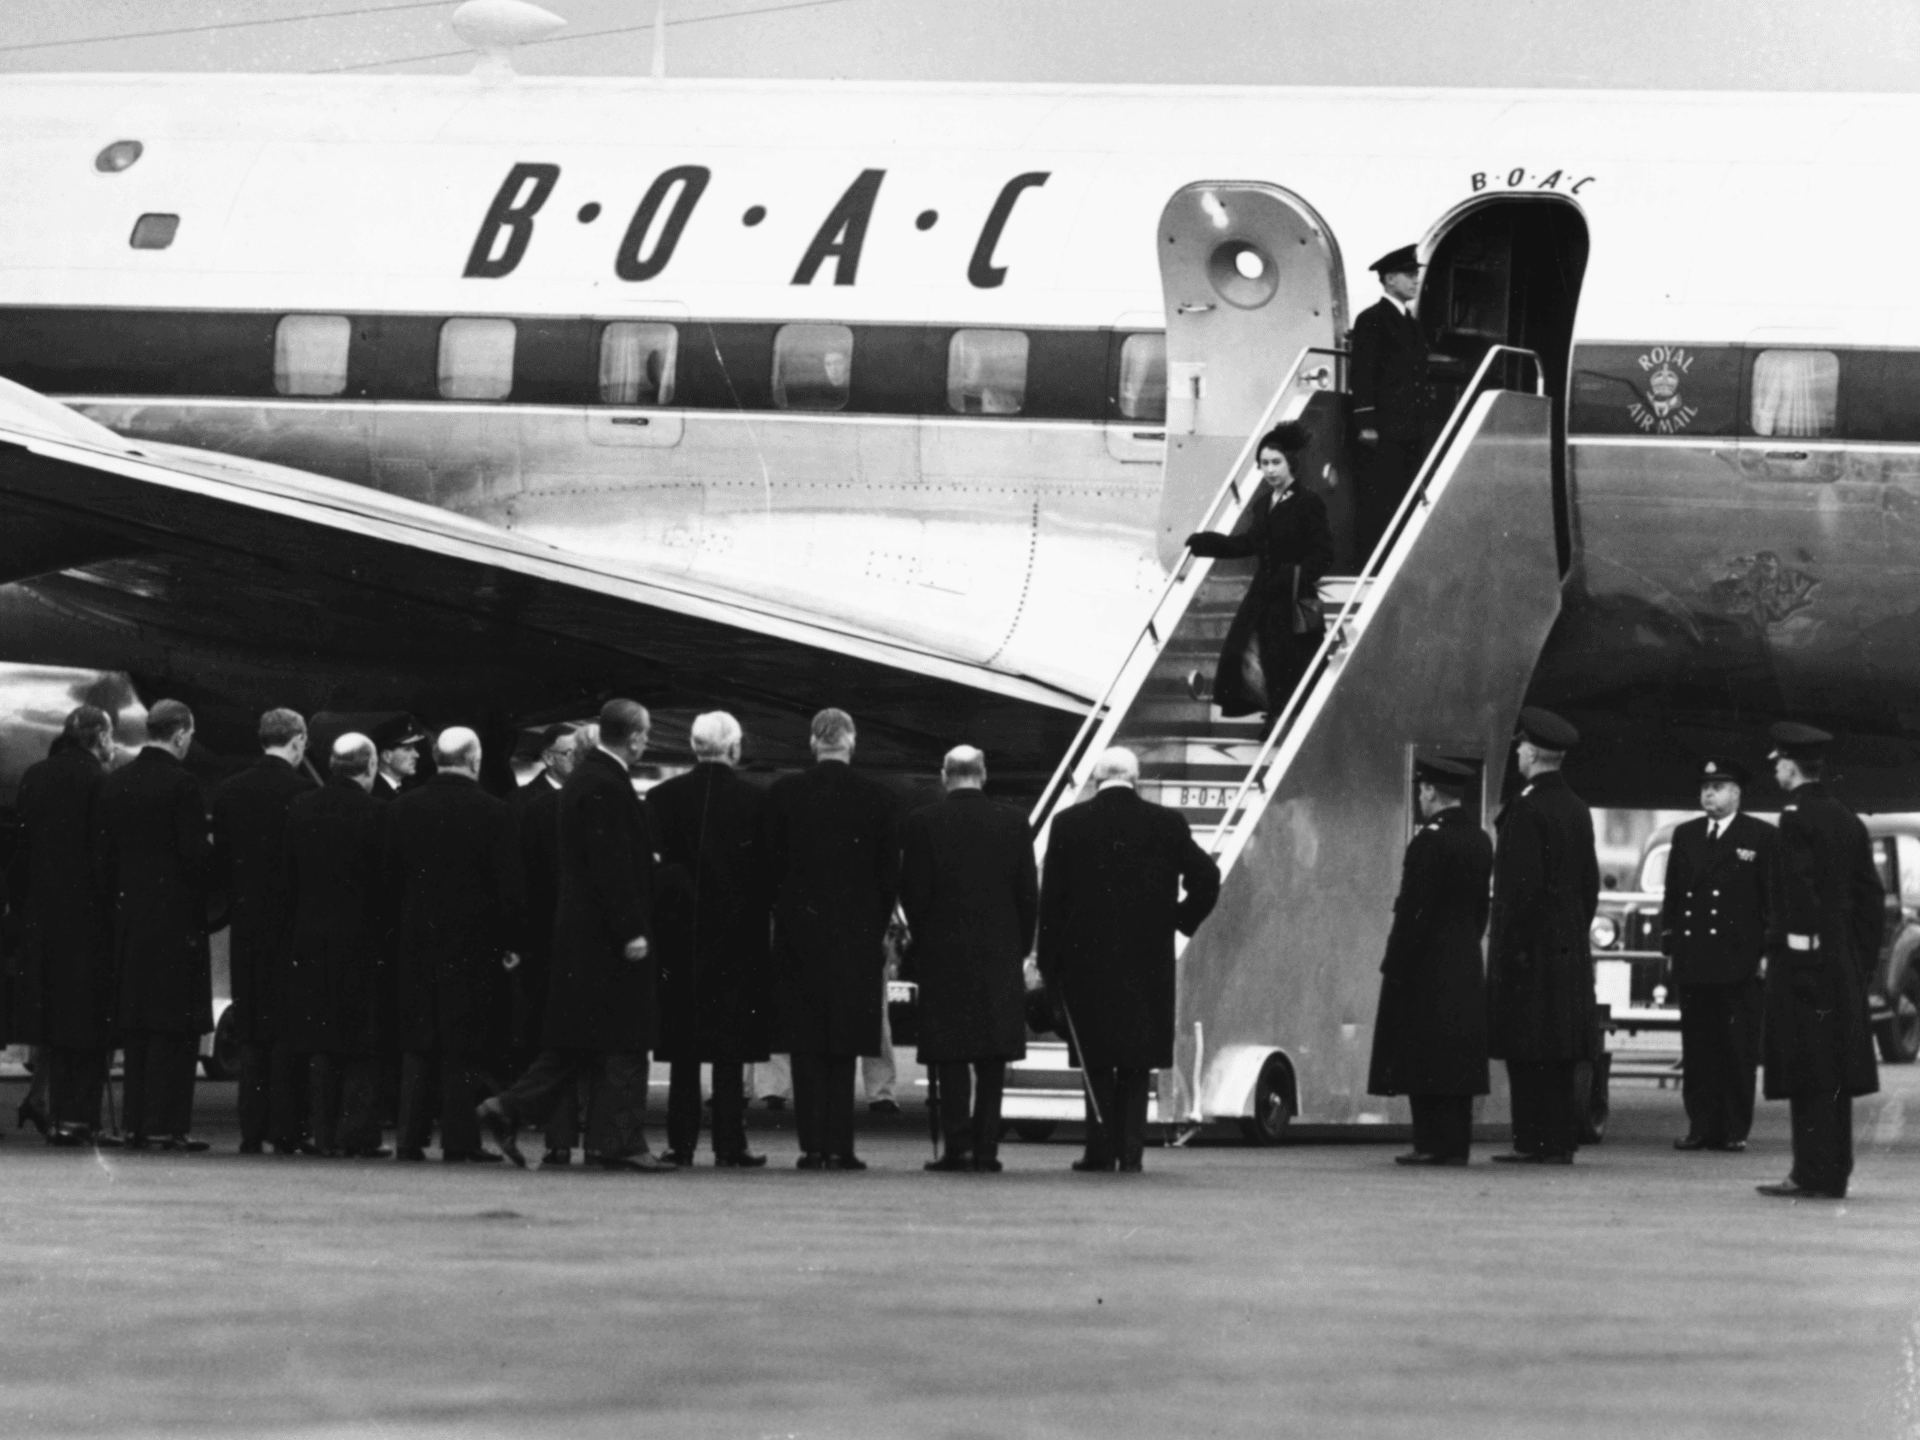 Queen Elizabeth II and Prince Philip, the Duke of Edinburgh, leaving their BOAC airliner as they return from Kenya following the death of King George VI and Elizabeth's accession to the throne, London, February 7th 1952. (Photo by Keystone/Hulton Archive/Getty Images)